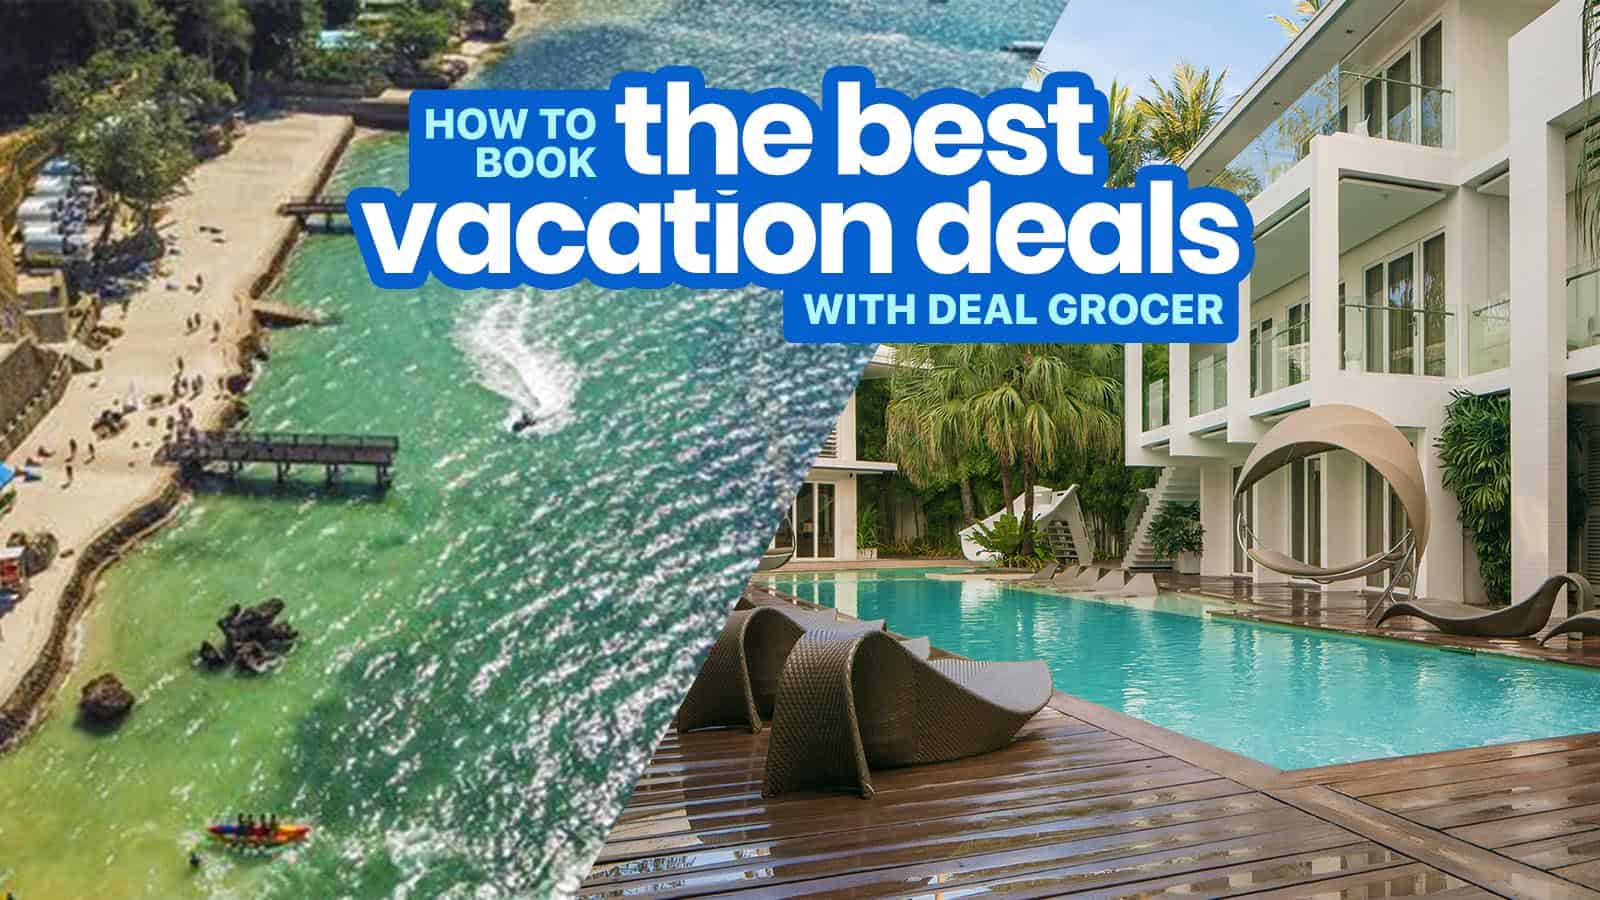 How to Book the BEST VACATION DEALS with Deal Grocer  The 